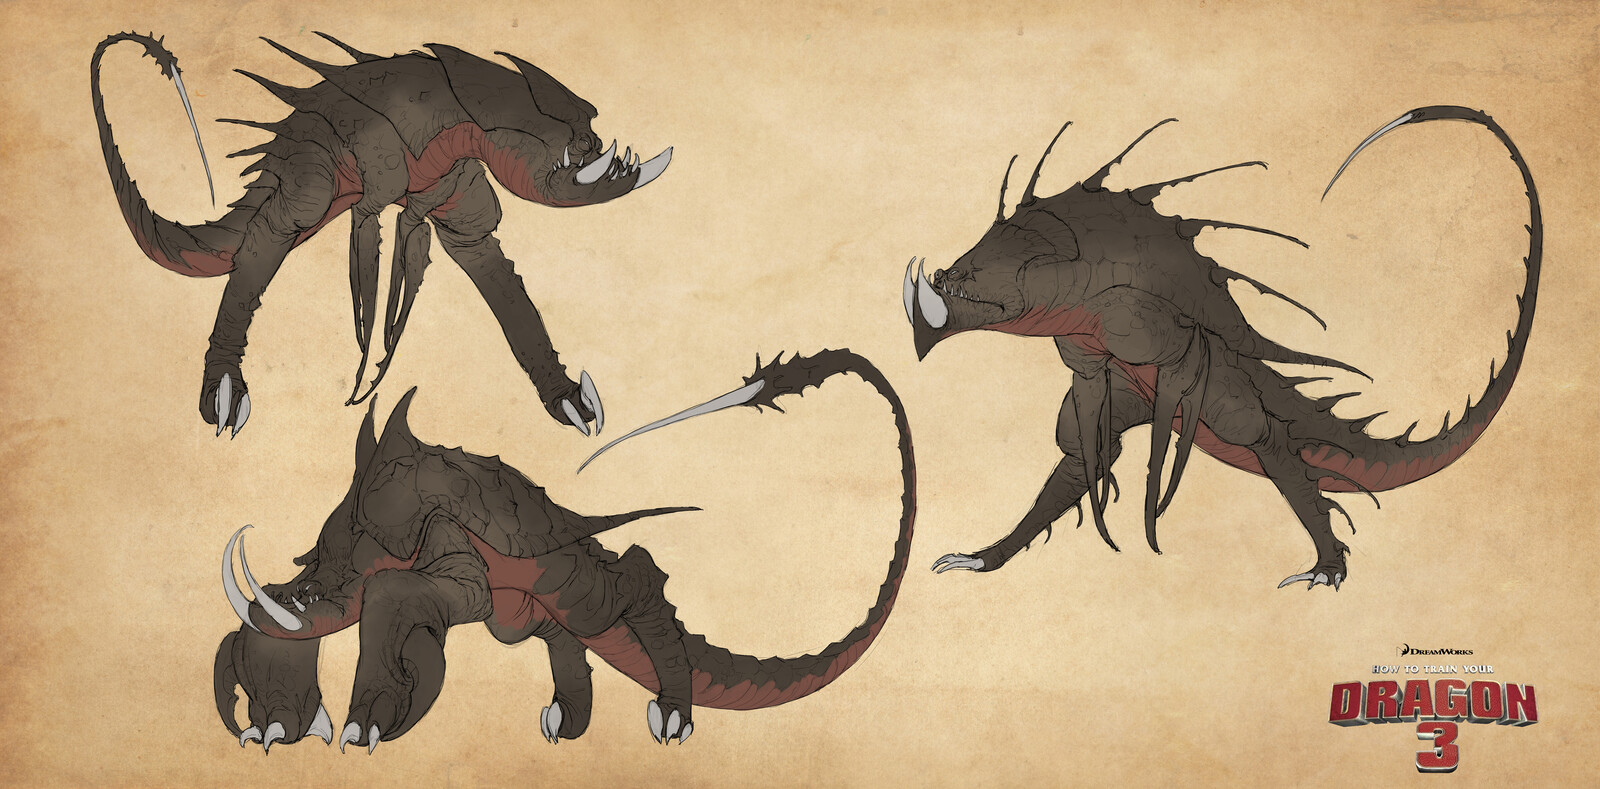 Those are early variations for the Deathclaw.